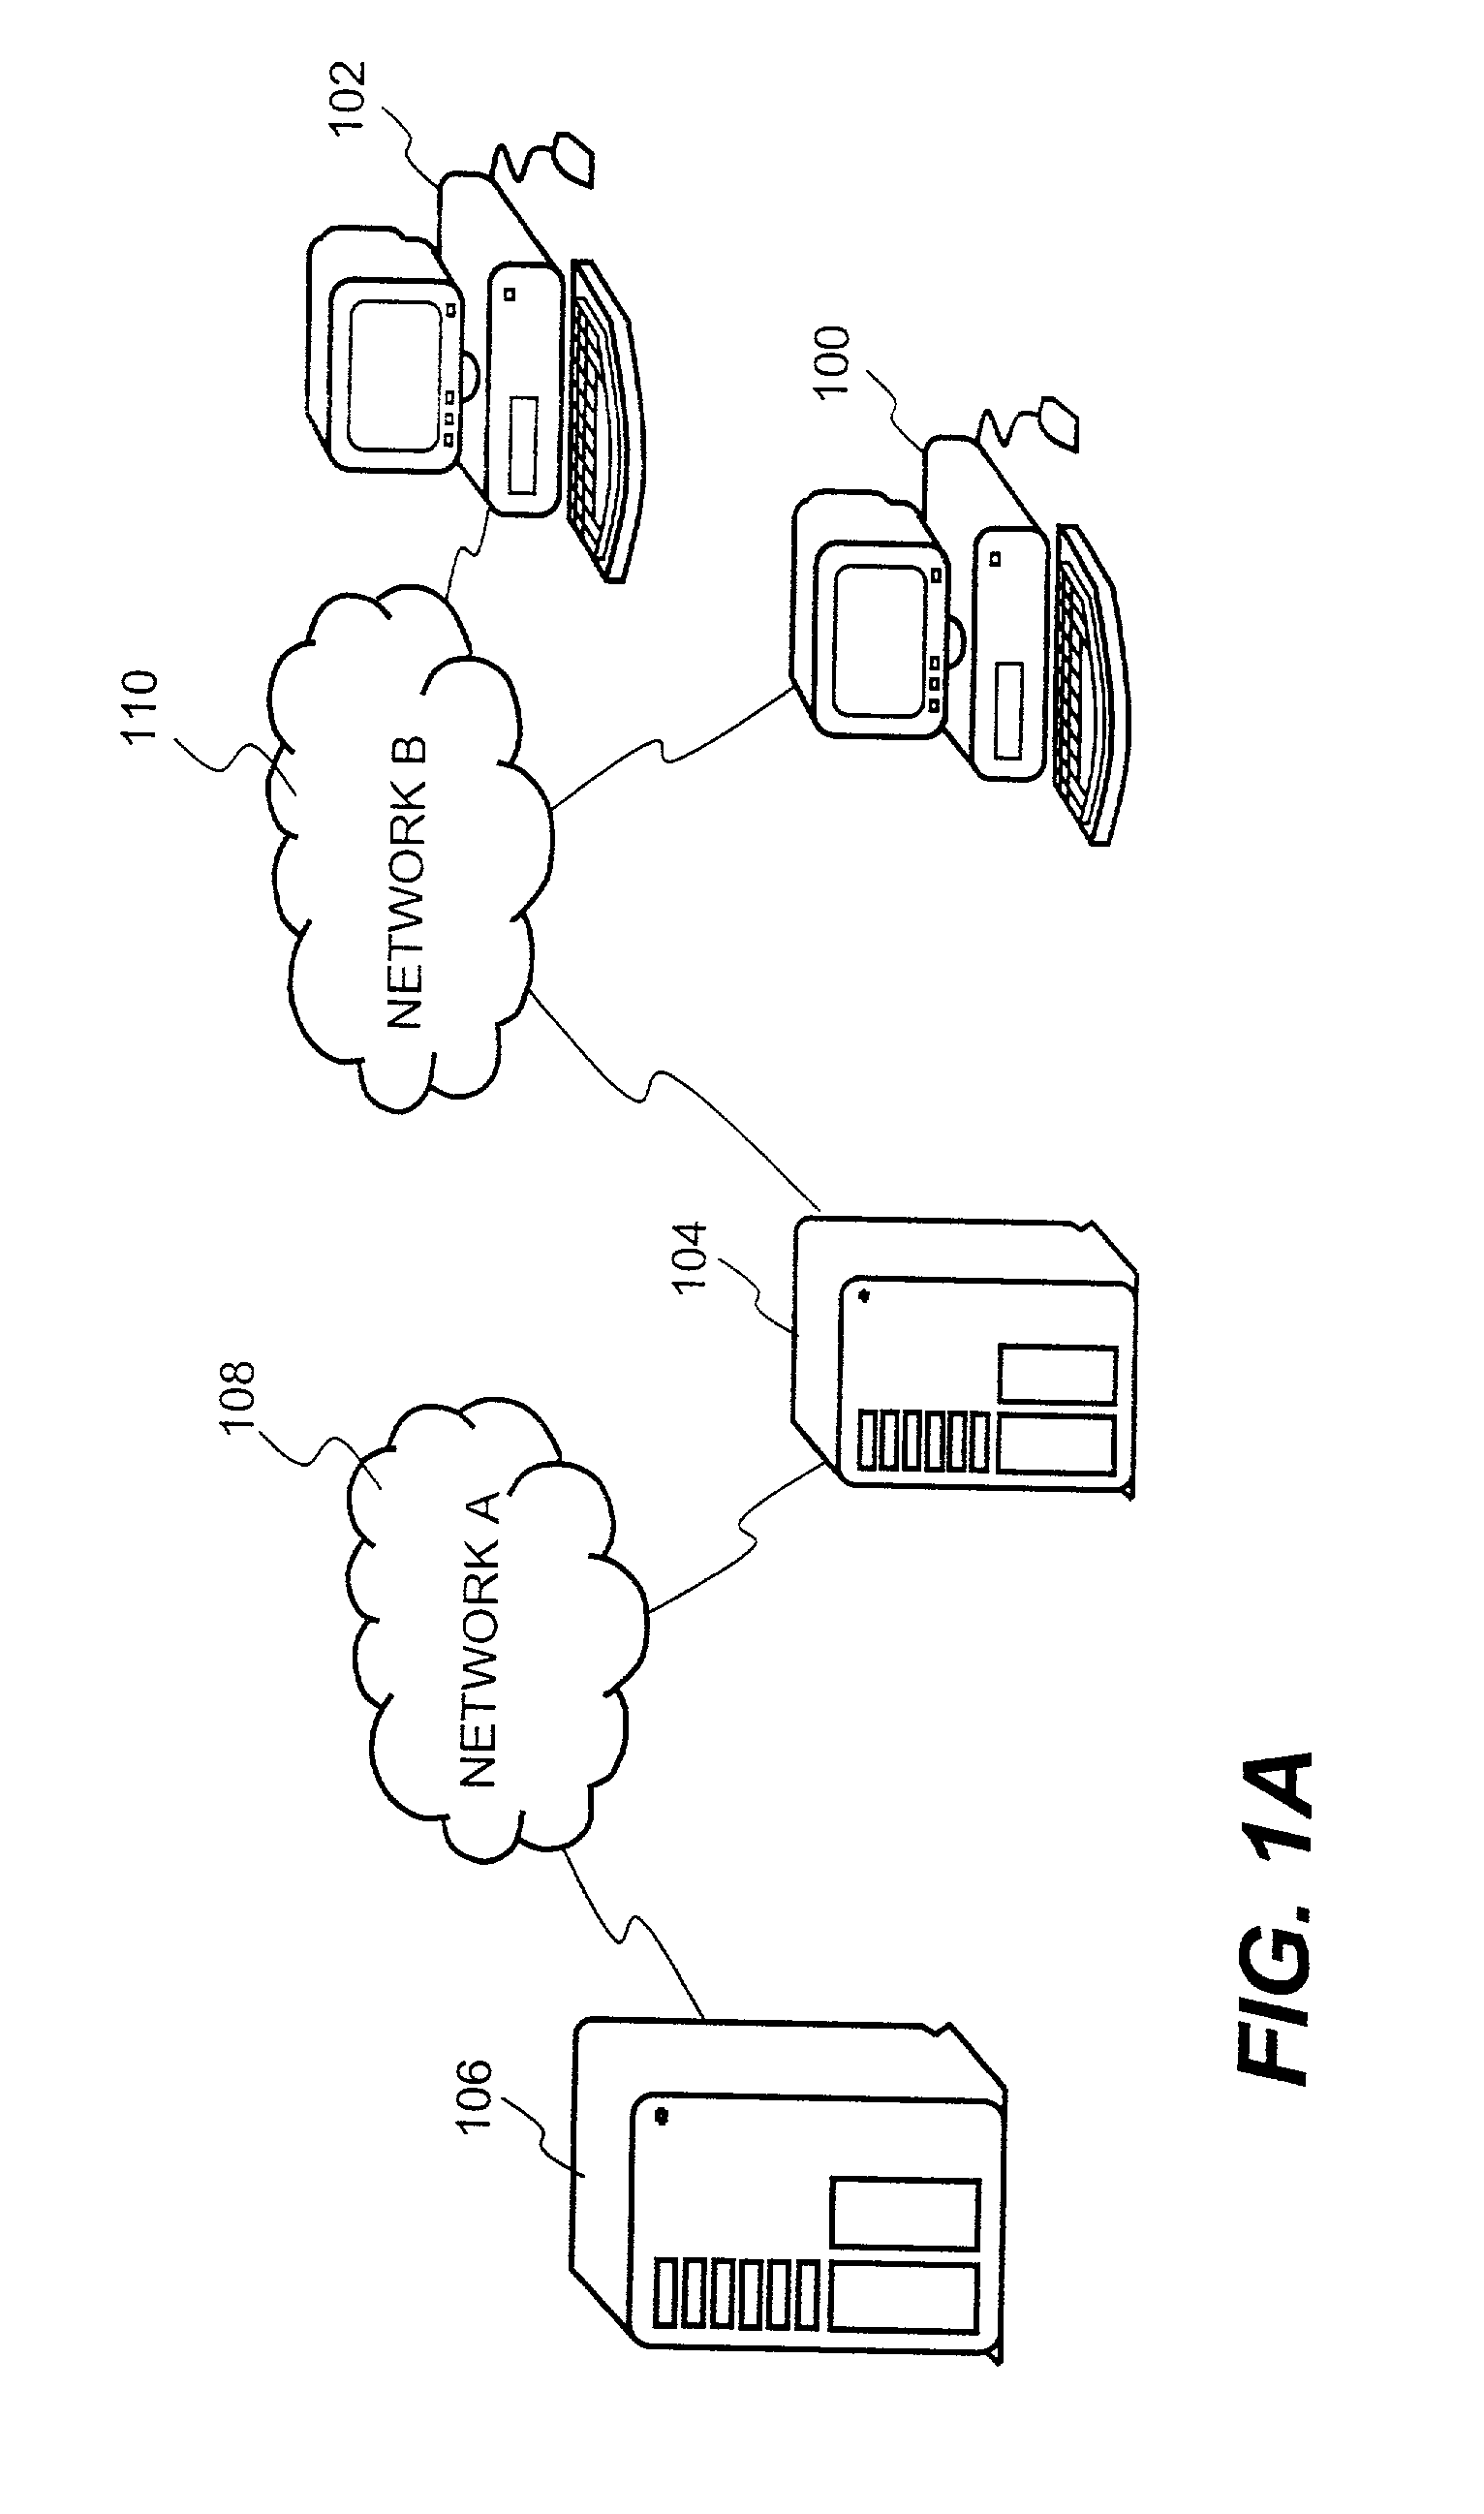 Method and apparatus for securing electronic data